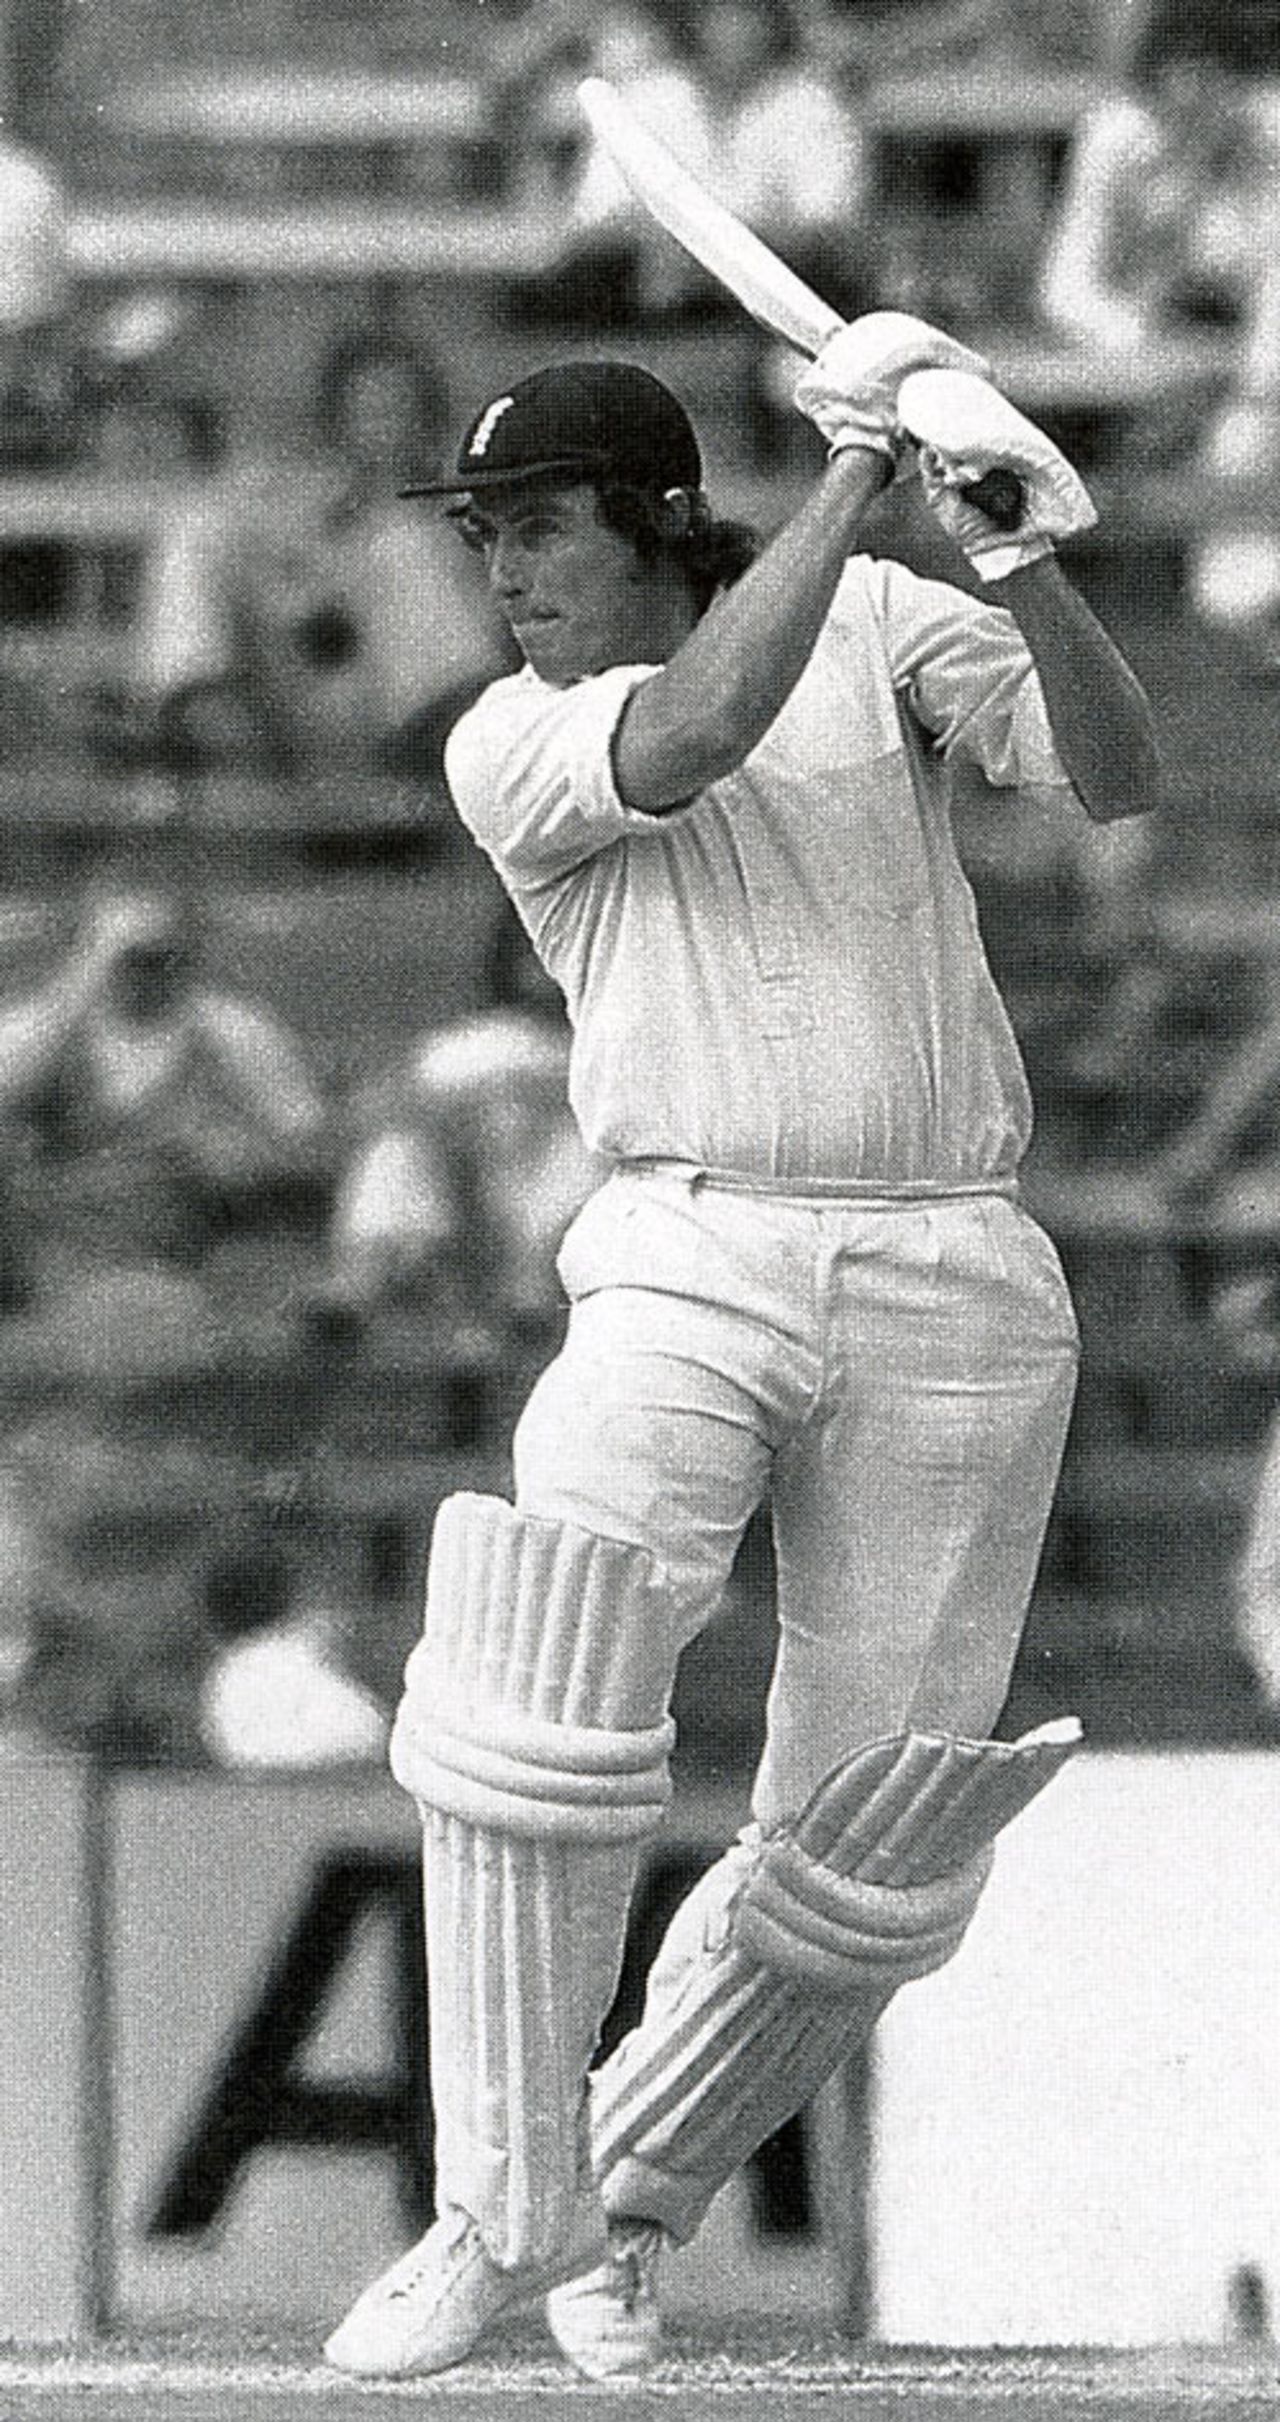 Bob Woolmer on his way to 149 at The Oval, an innings which helped England save the Test, England v Australia, 4th Test, The Oval, August 24, 1975